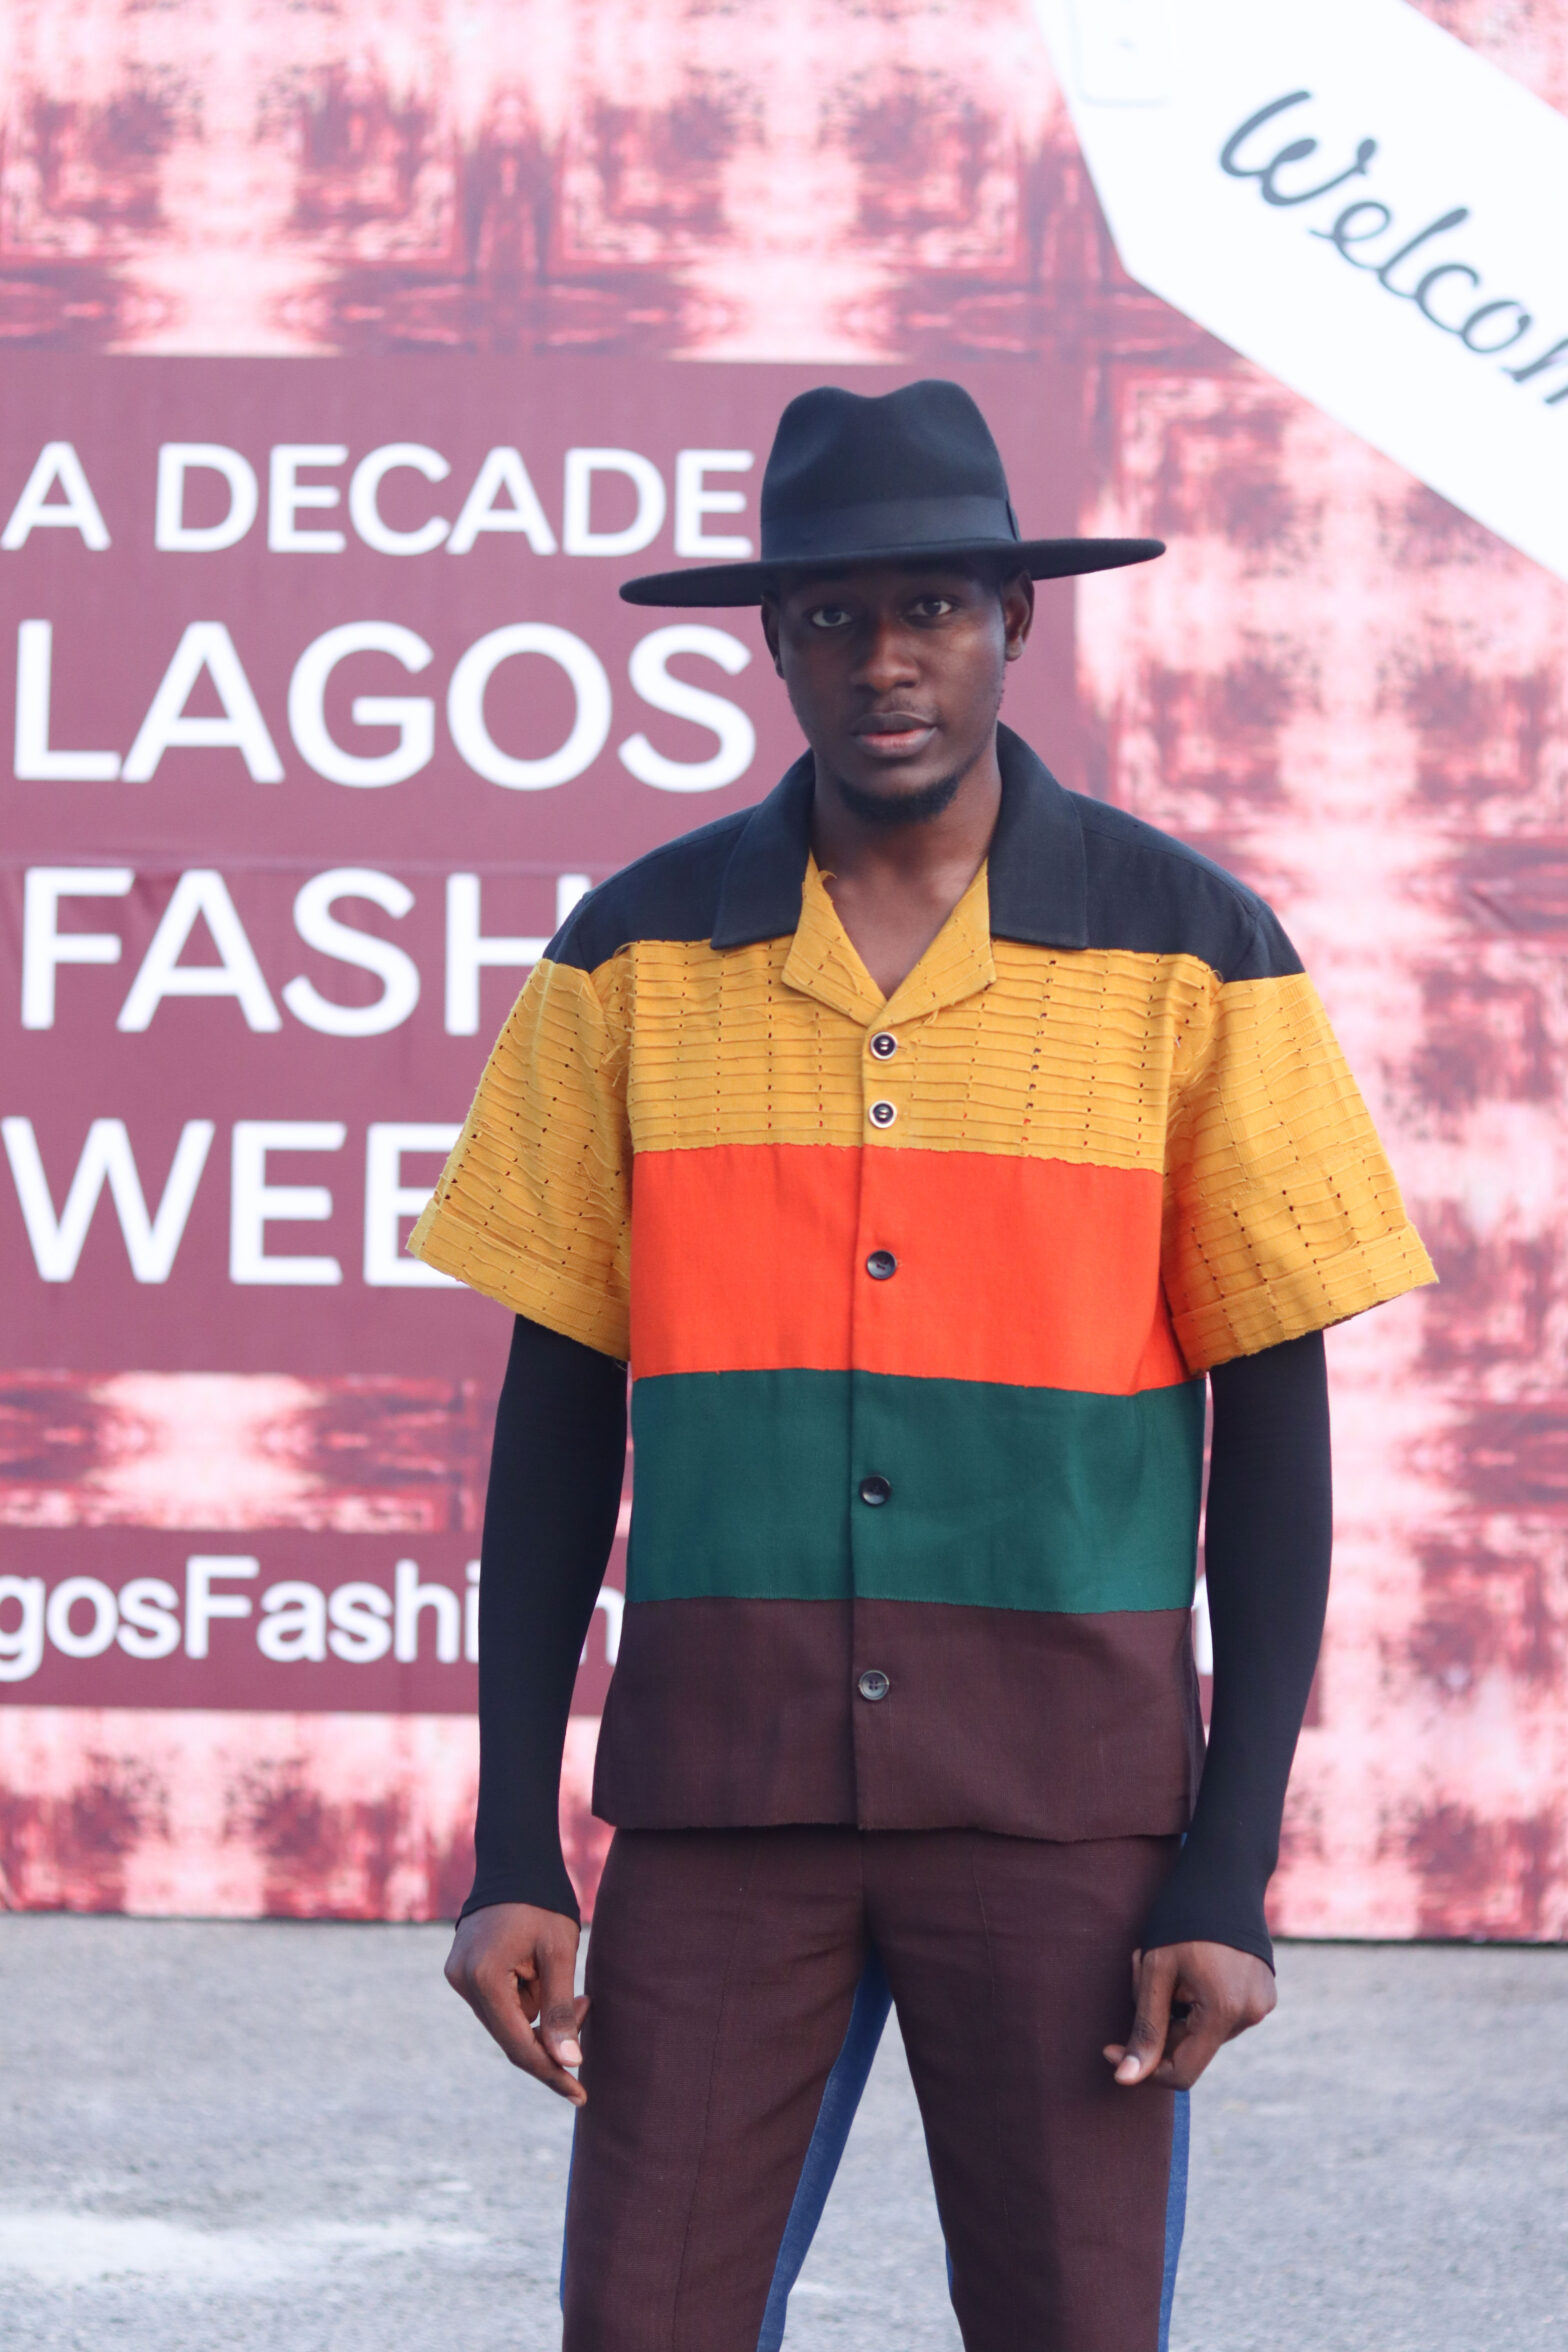 How to register for Lagos fashion week